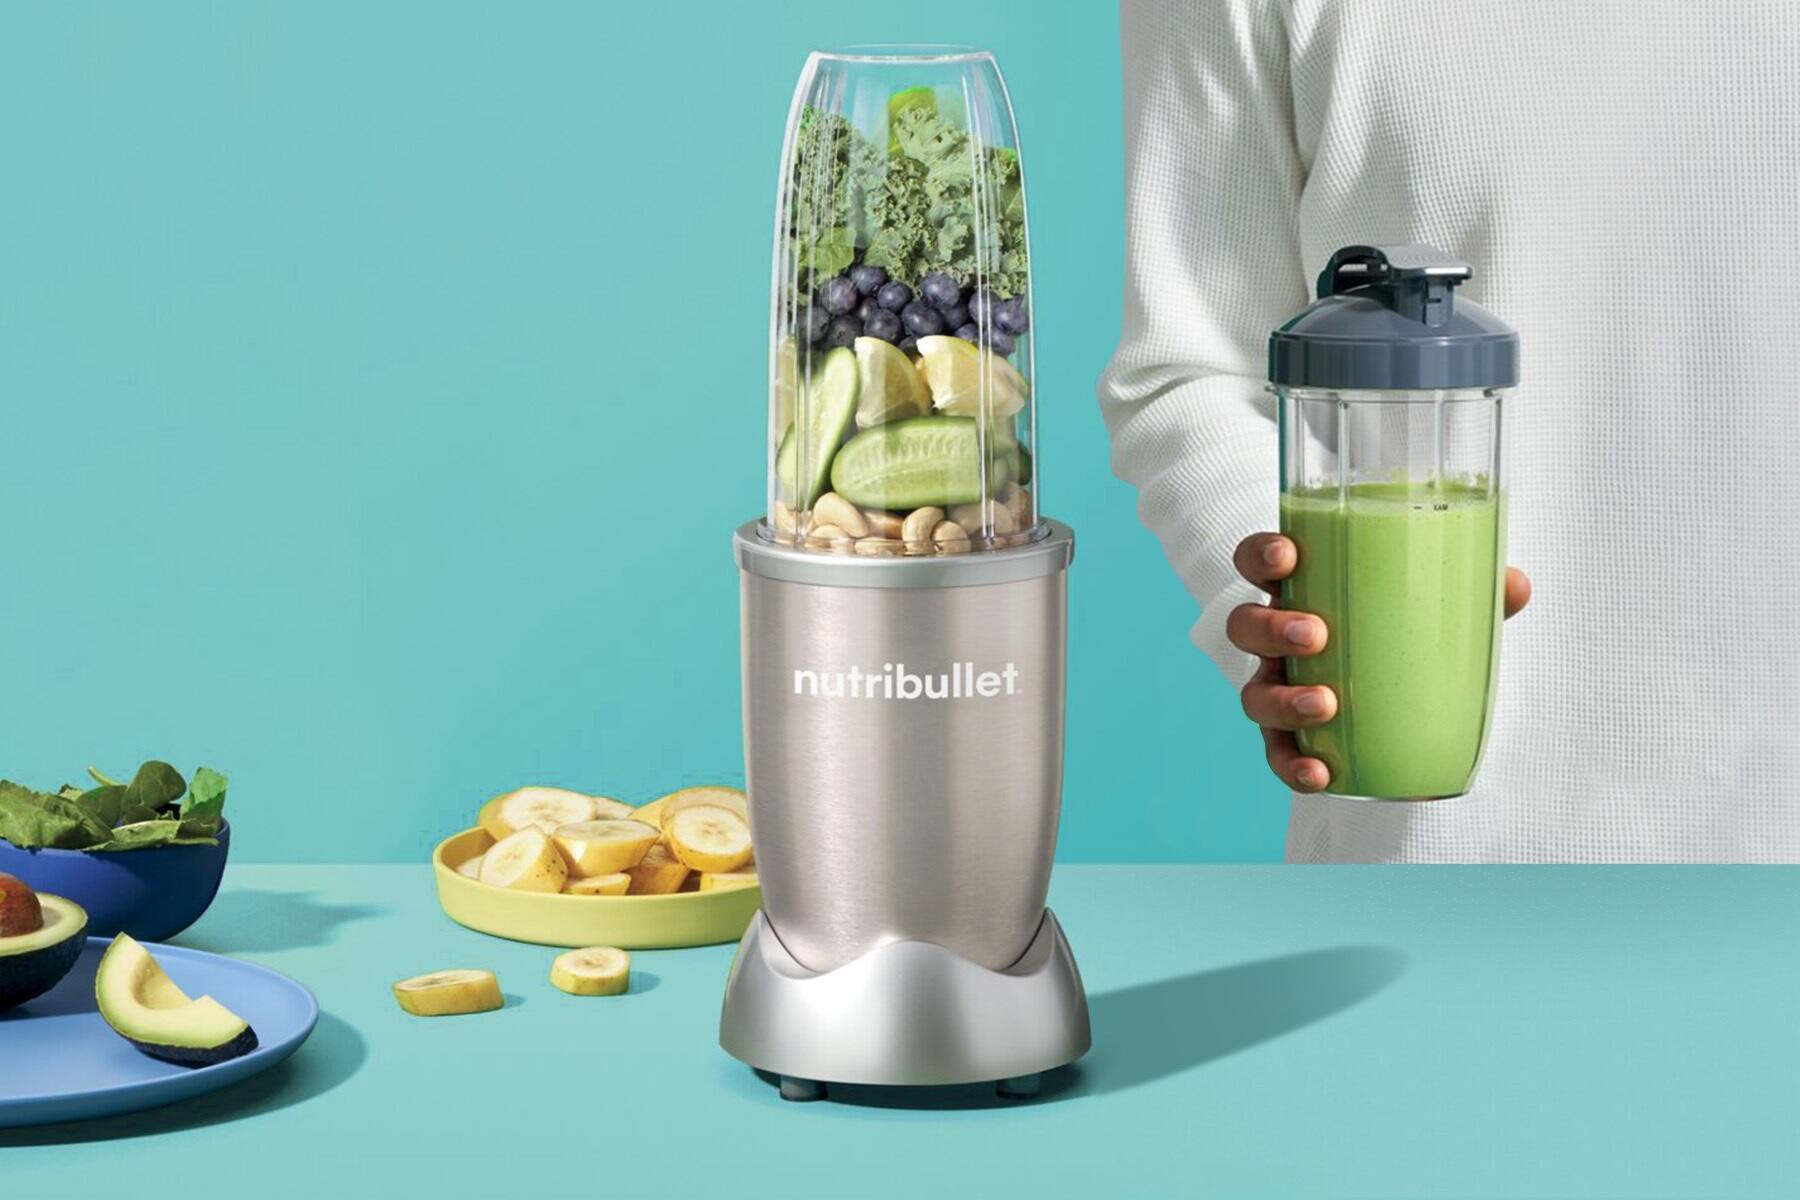 In the centre of the graphic is a Nutribuller blender, with fruit and vegetables on its left side and a man holding a finished smoothie on its right. The background is blue, cool